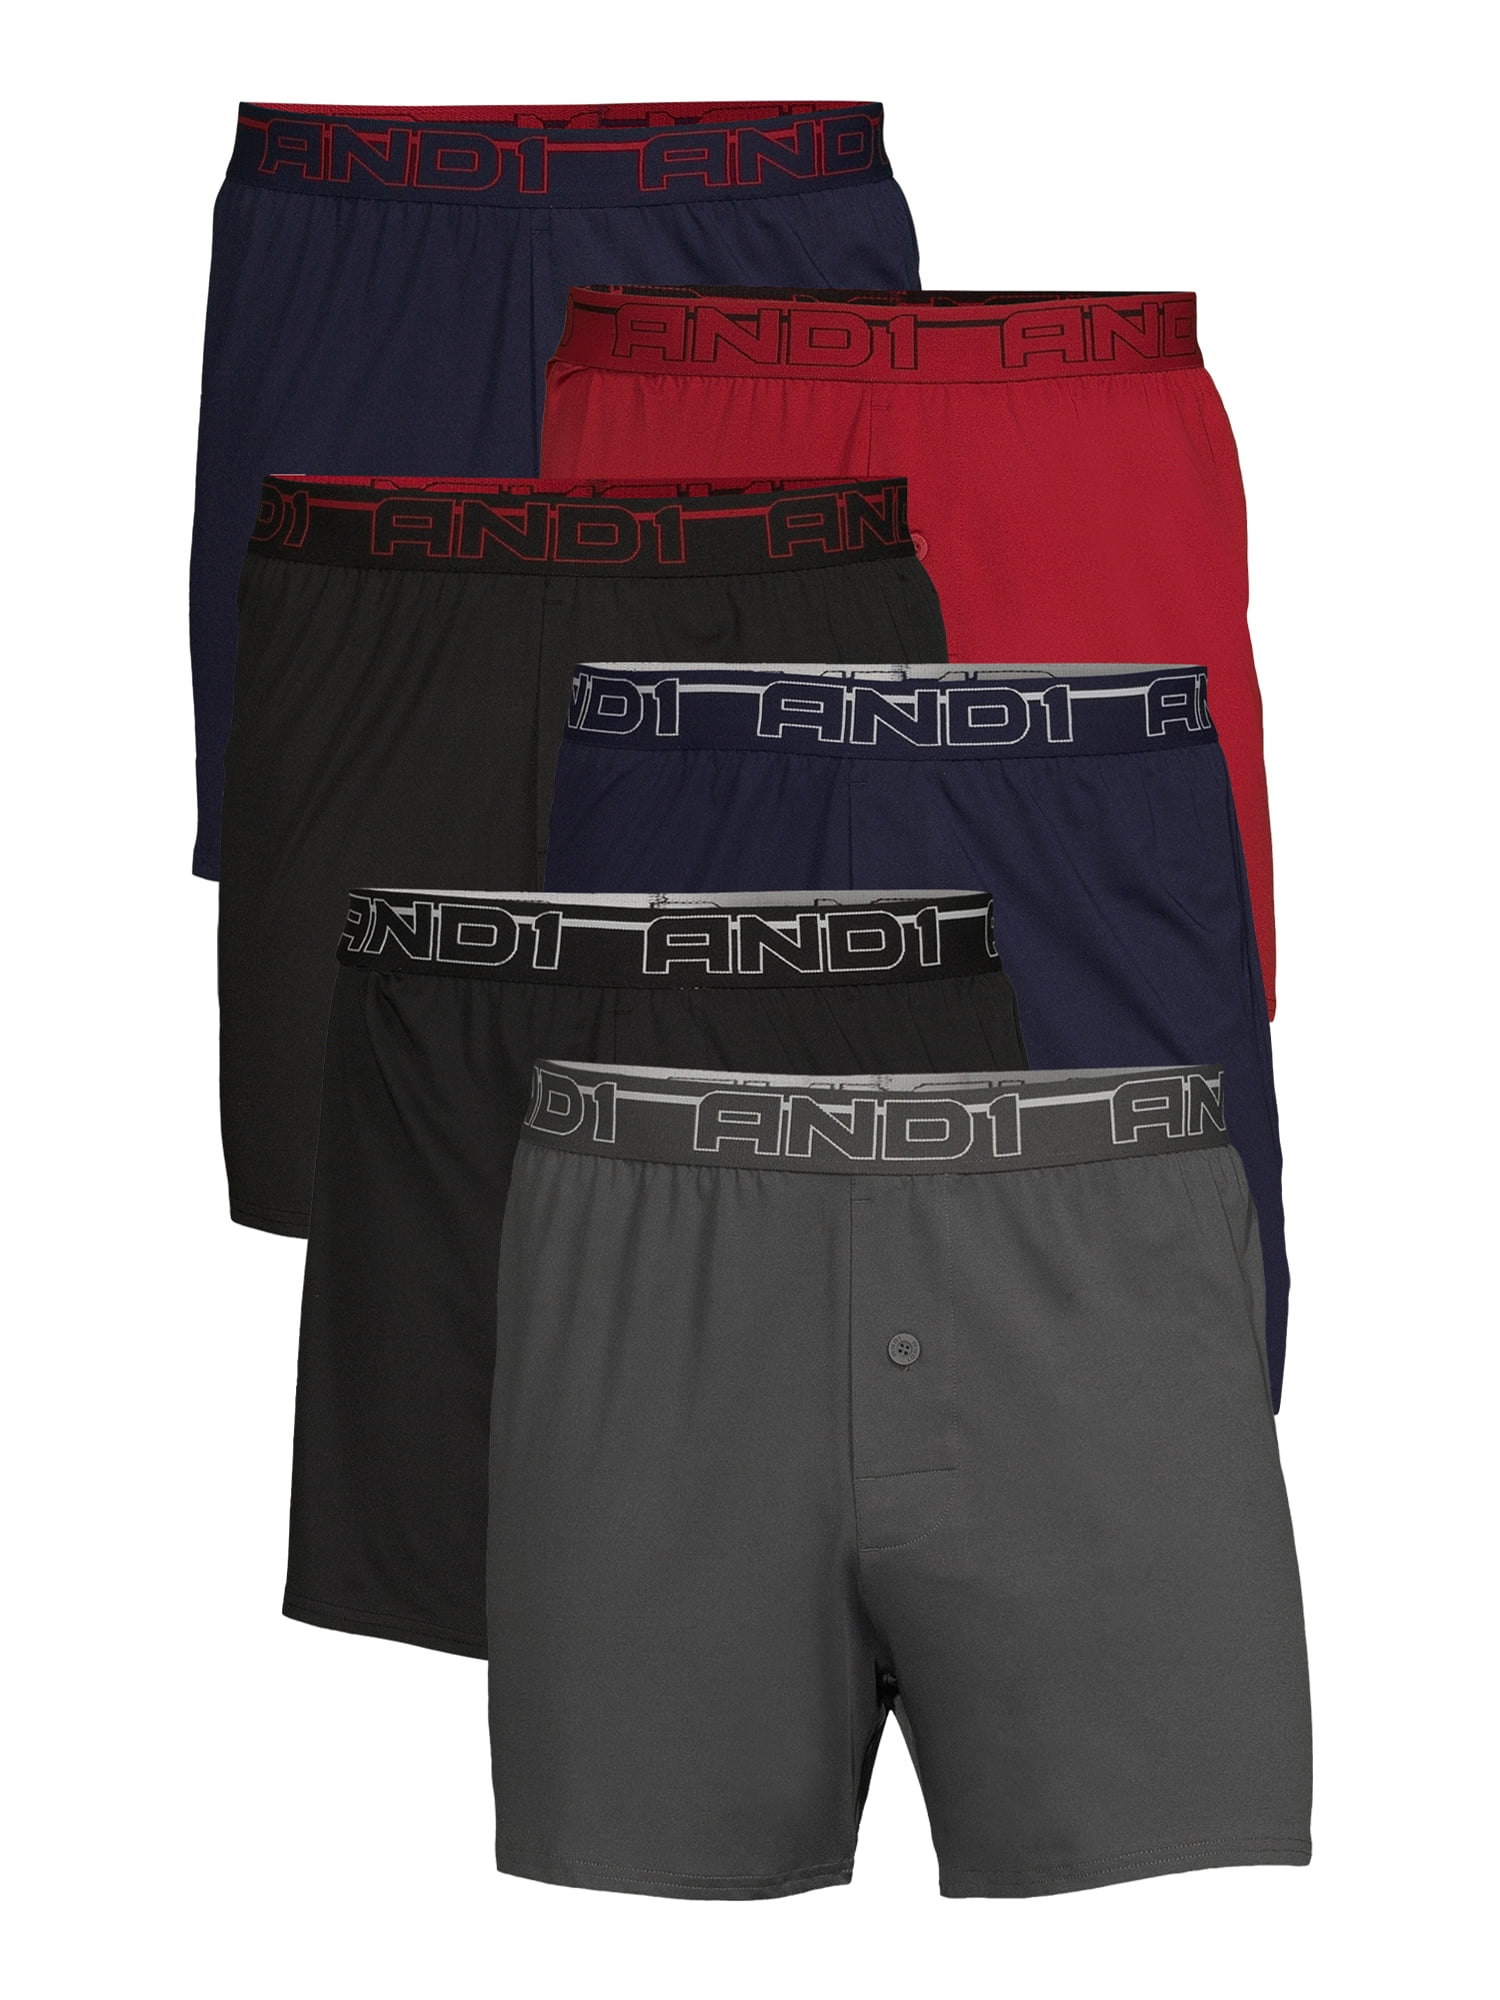 AND 1 Men's Knit Boxers, 6-Pack, Sizes S-3XL 